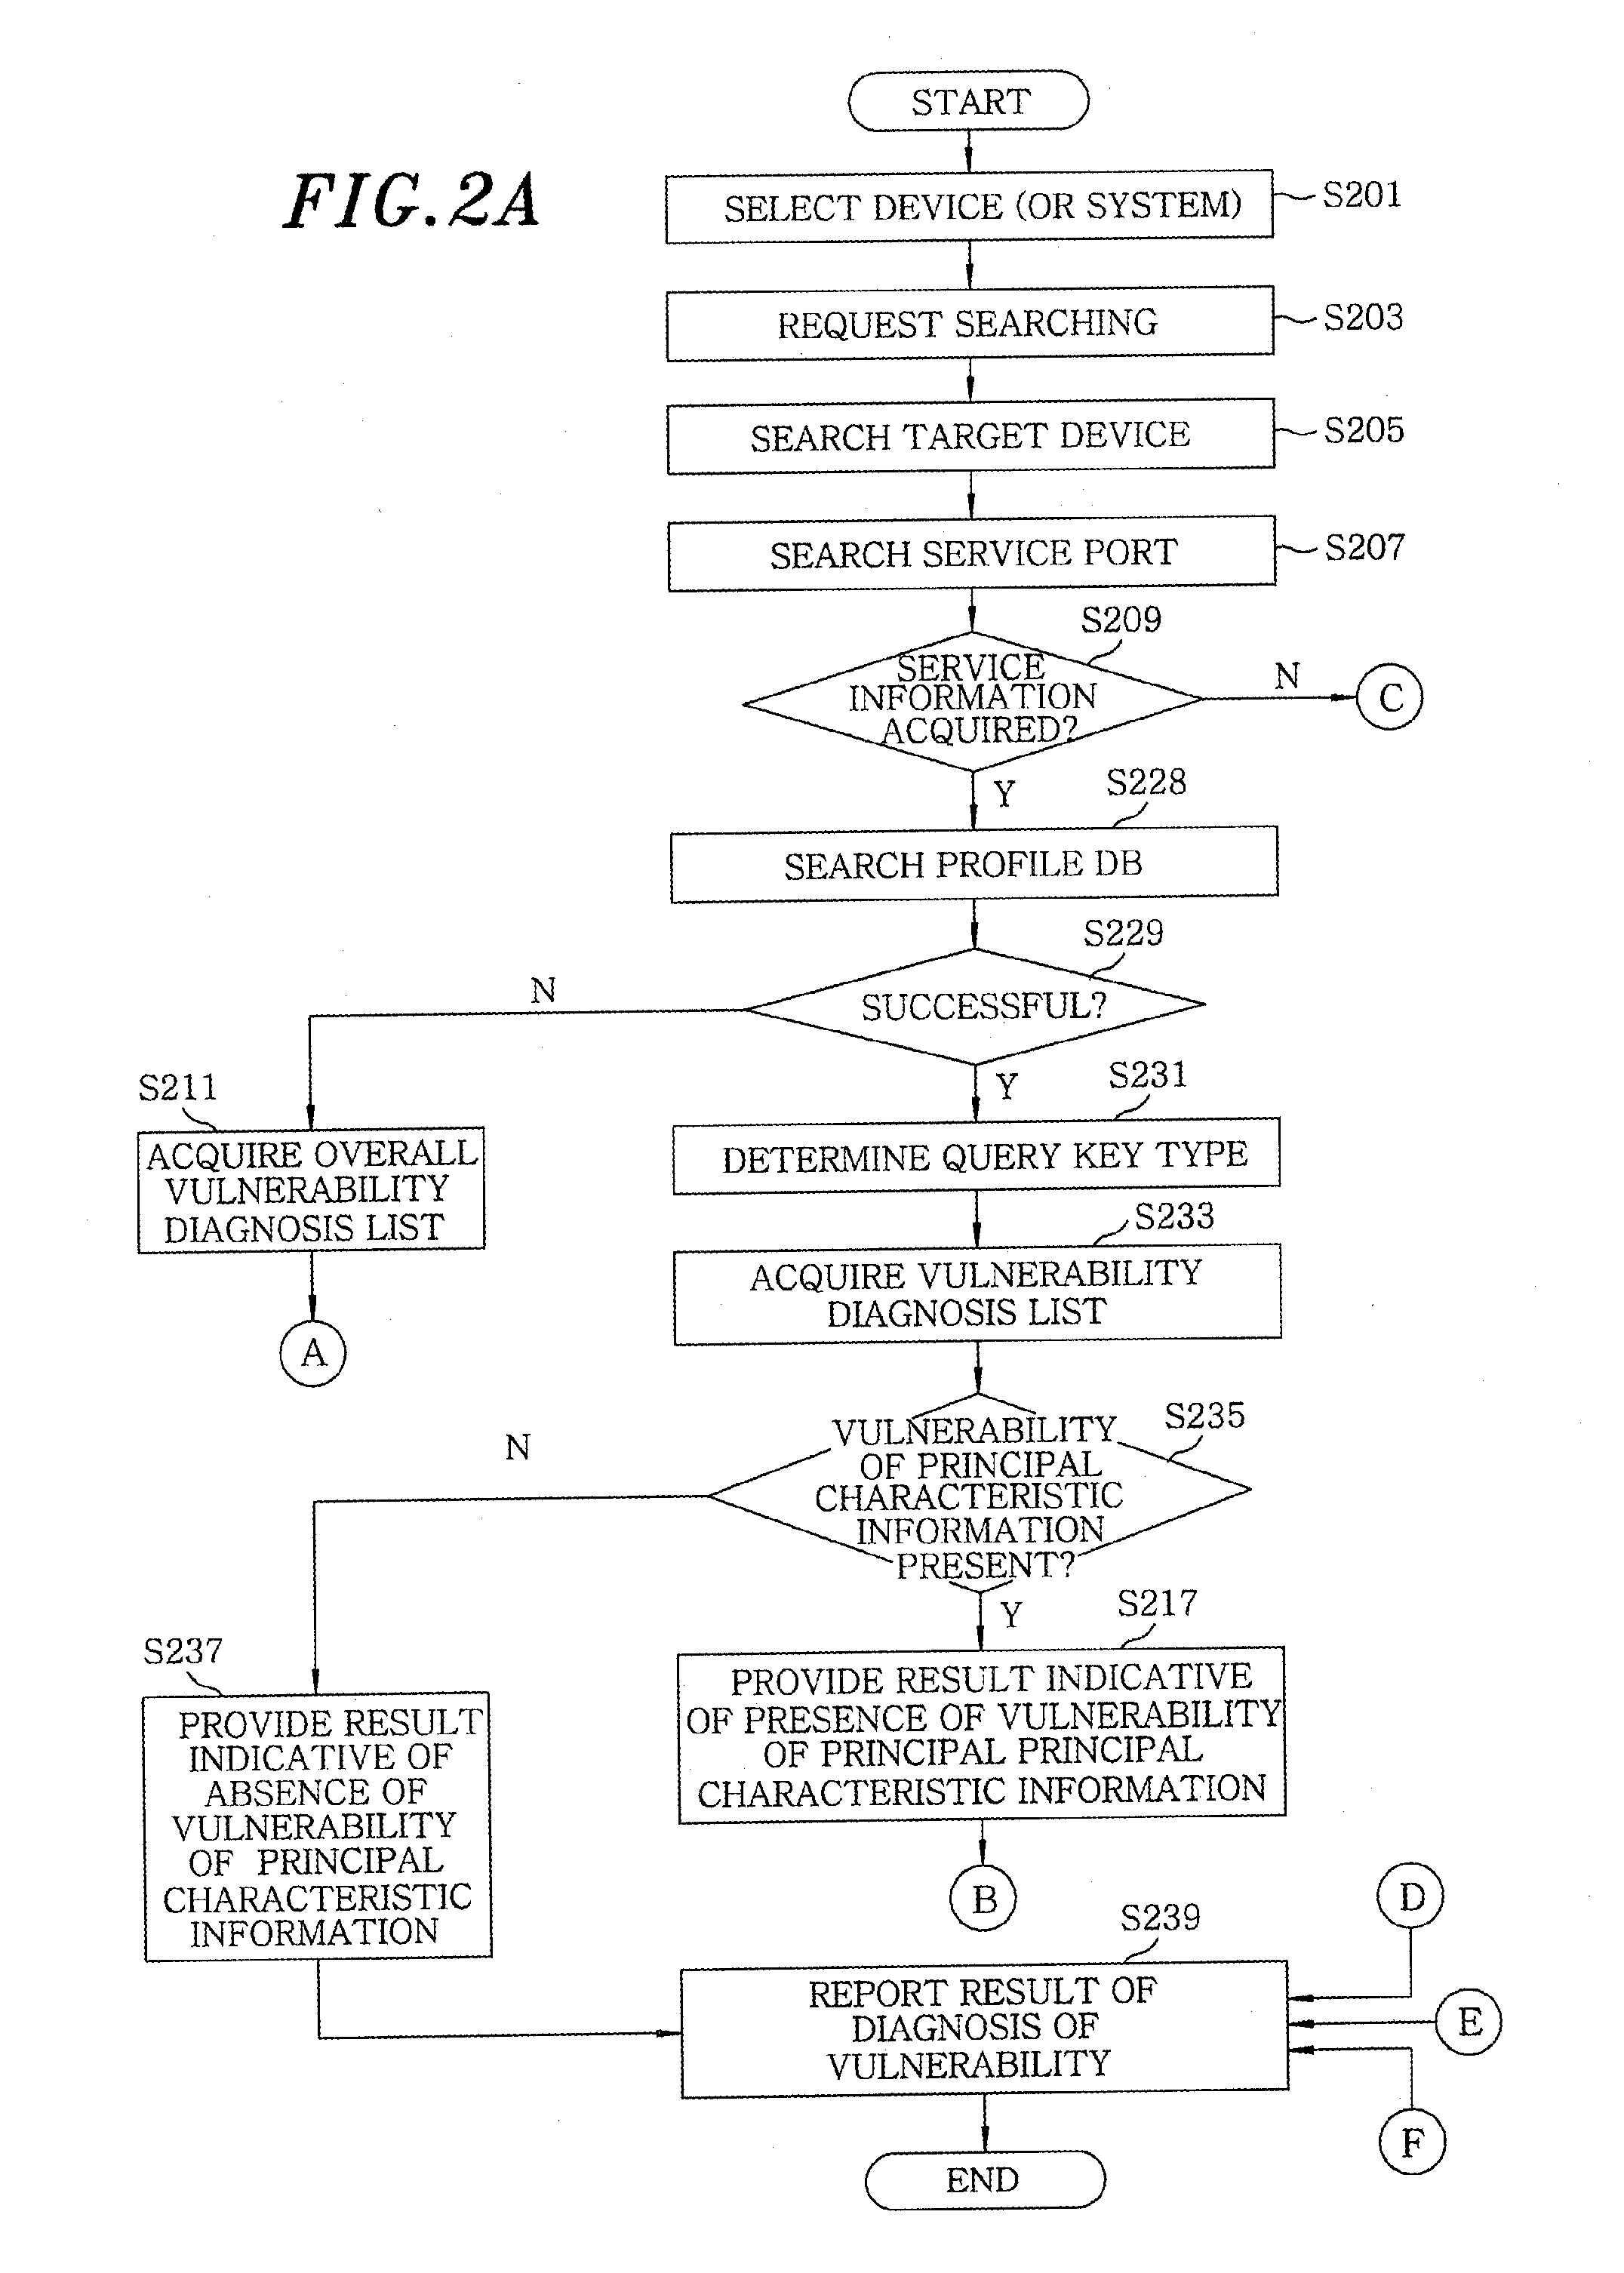 Apparatus and method for remotely diagnosing security vulnerabilities